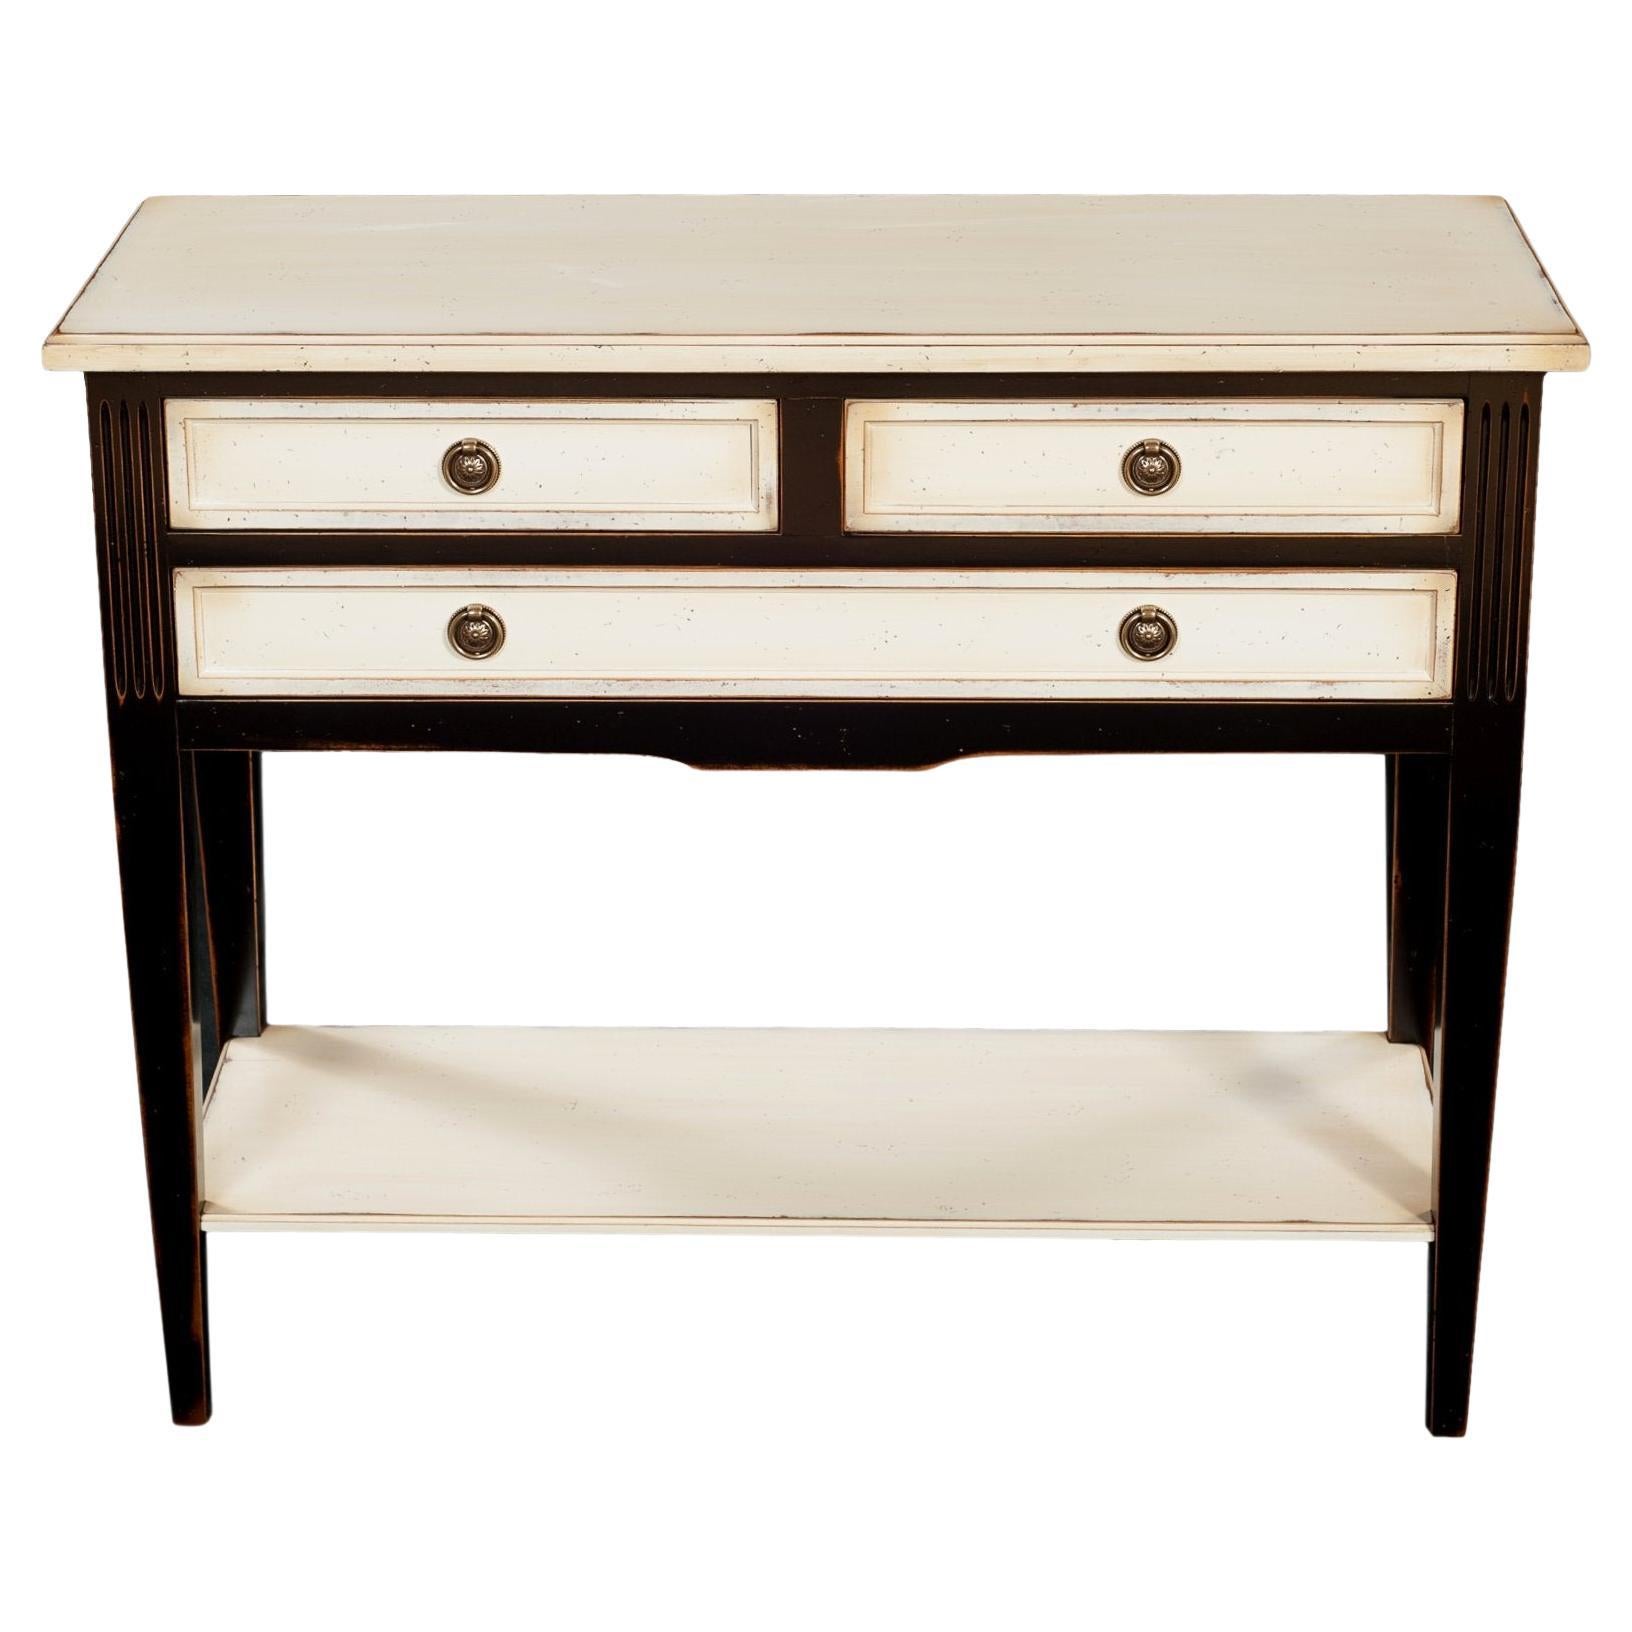 3 Drawers French Directoire Style Console, Black and White Cream Finish